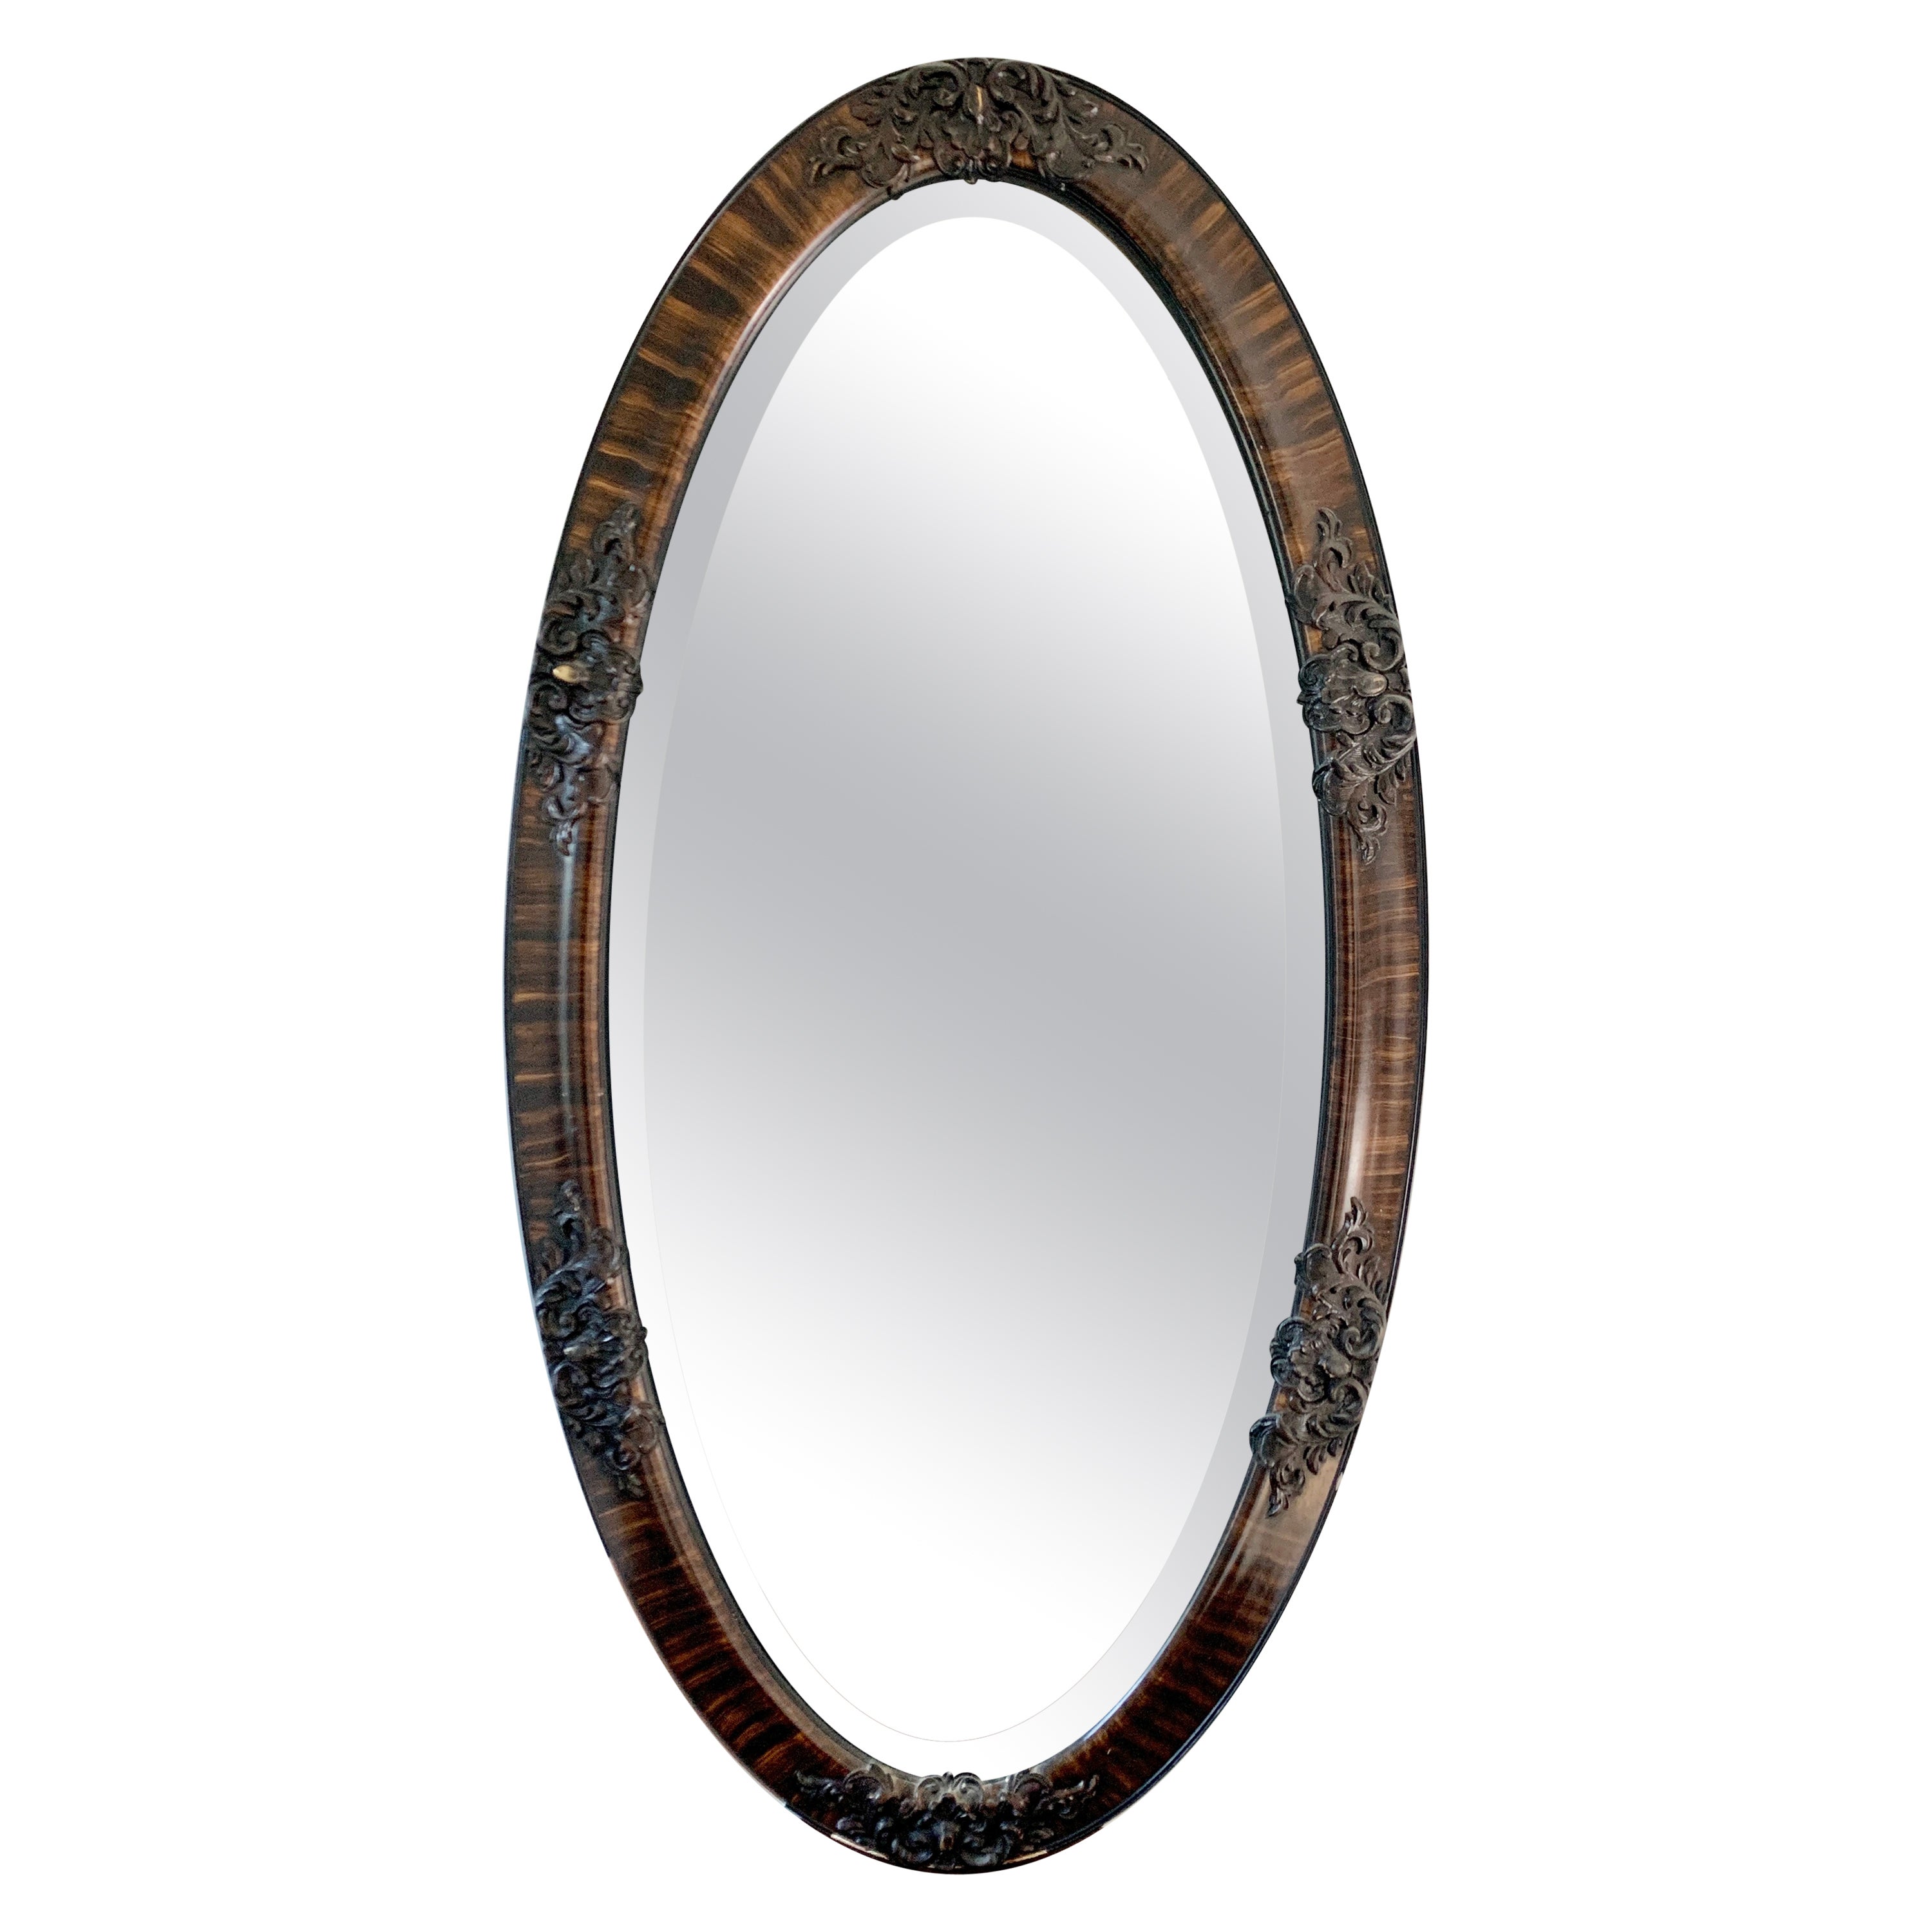 Antique Victorian Tiger Oak Beveled Oval Wall Mirror, Late 19th Century For Sale